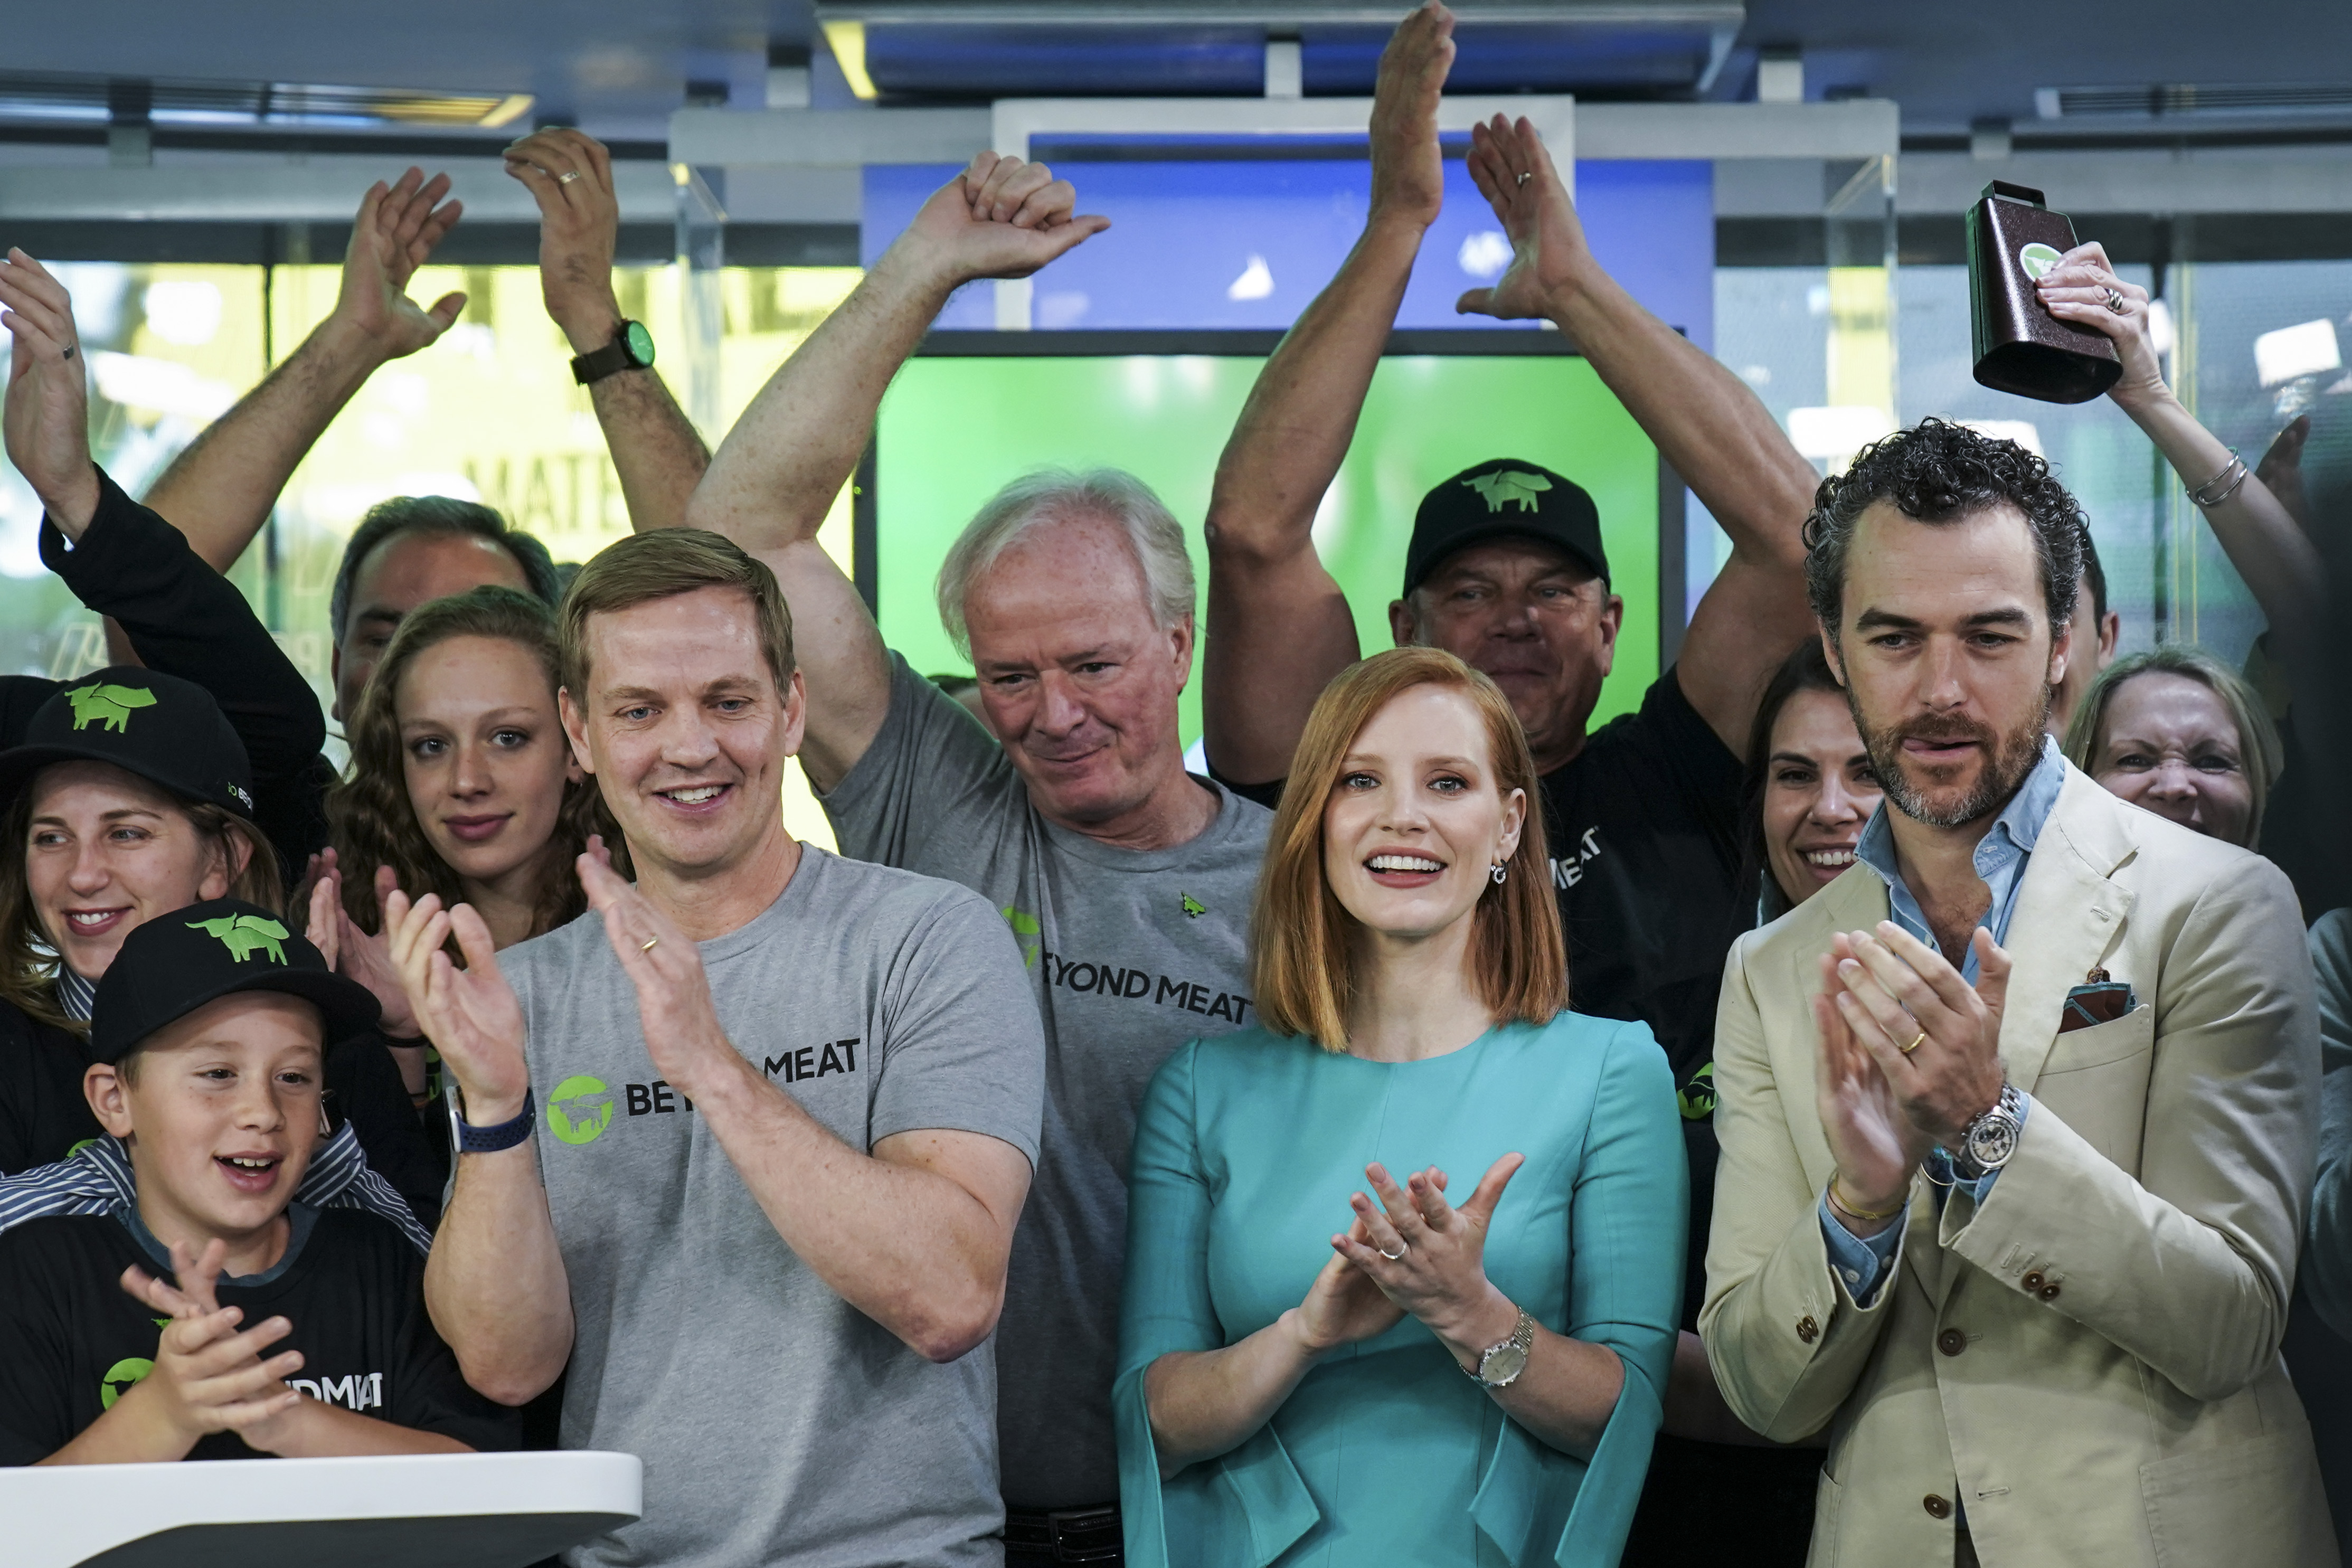 Beyond Meat investor Jessica Chastain attends the opening bell ceremony at Nasdaq MarketSite to mark the IPO of Beyond Meat, May 2, 2019 in New York City. The company had the best U.S. IPO of the year so far. (Drew Angerer&mdash;Getty Images)